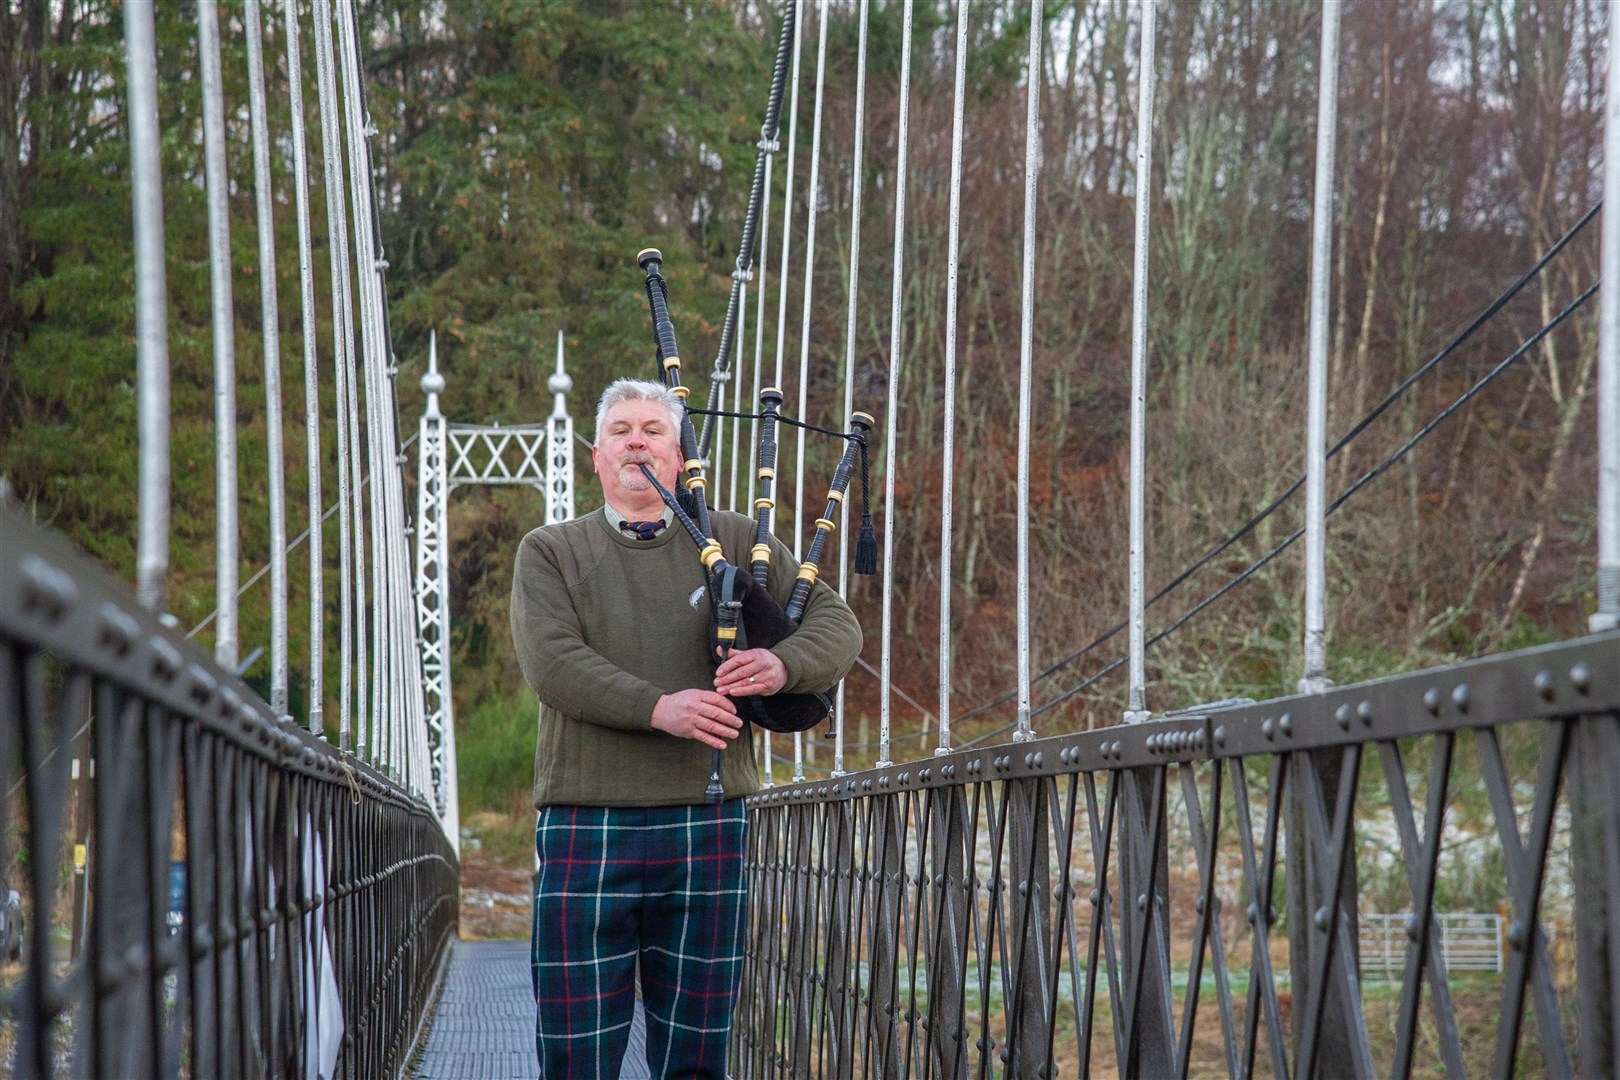 Allan Sinclair, pictured here at the opening ceremony in 2020, will once again be piping across the Penny Bridgethis year. Picture: Daniel Forsyth